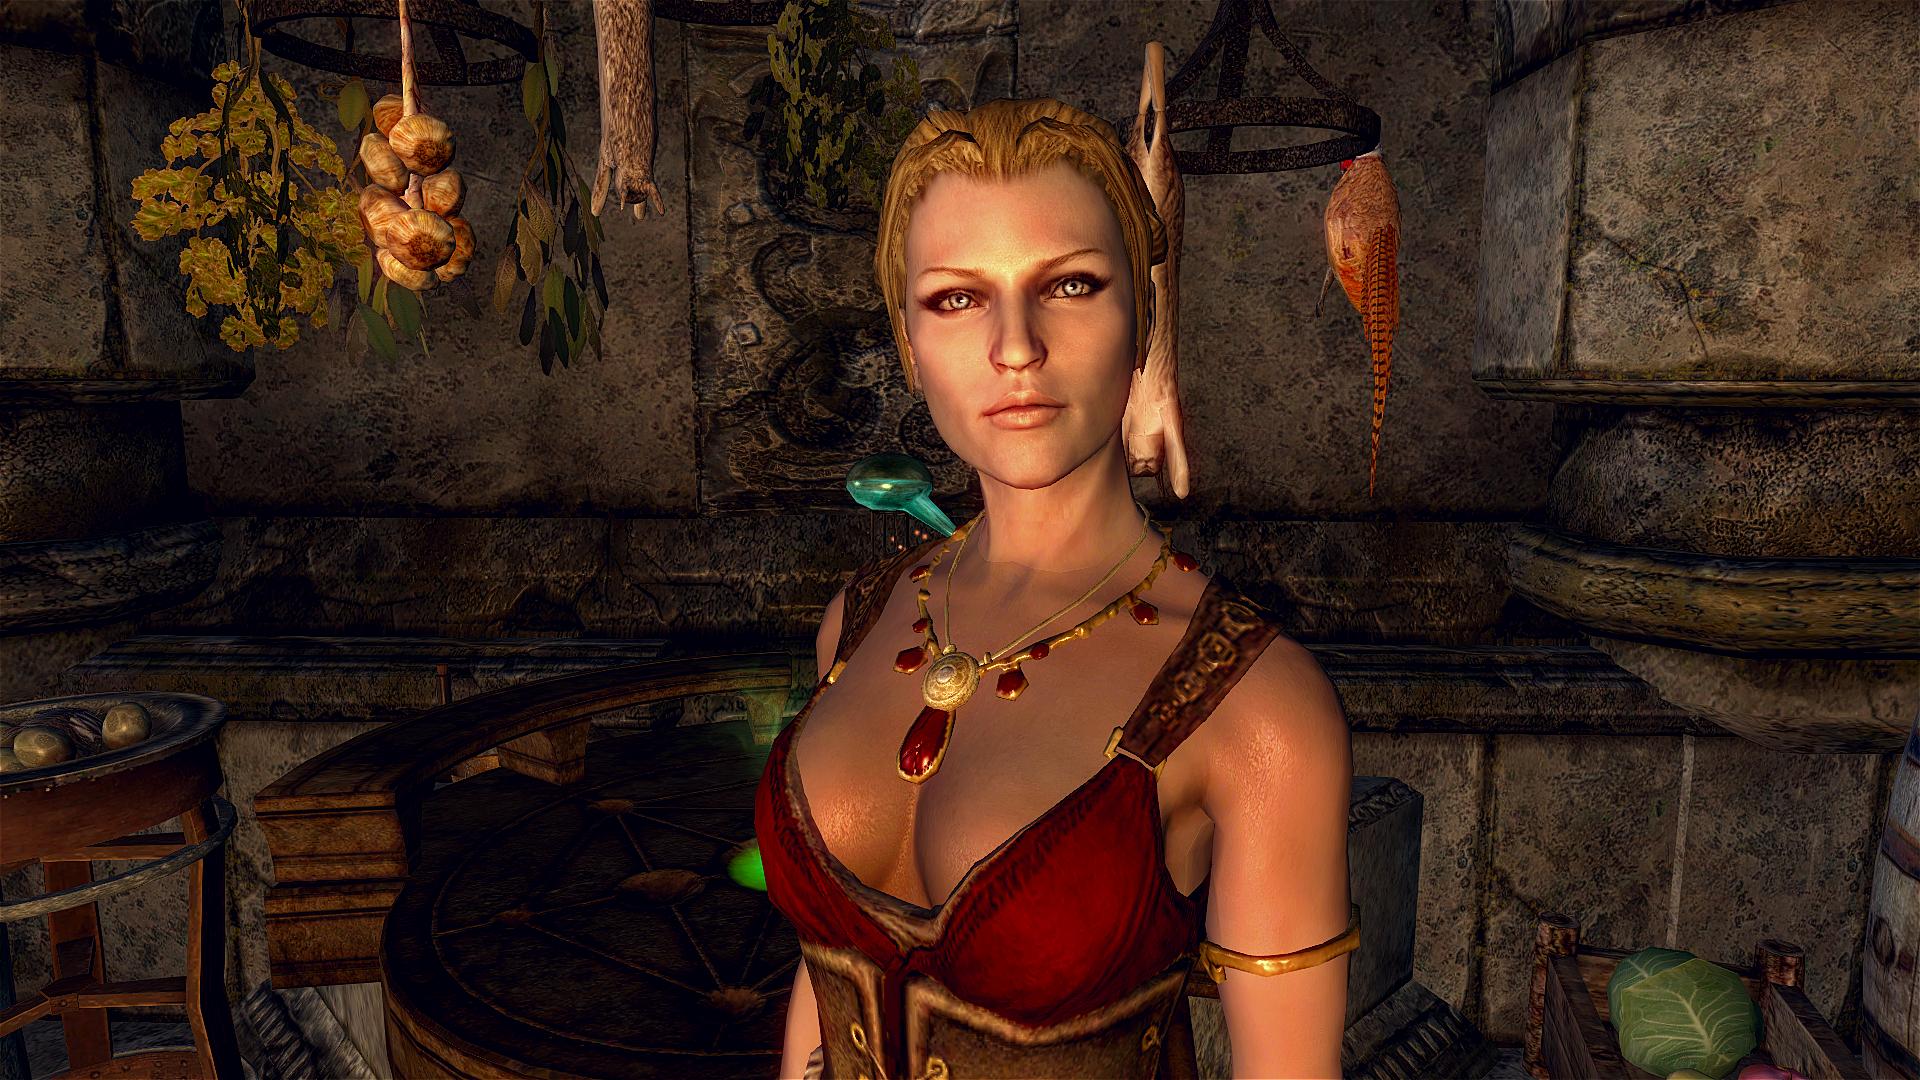 ben giudici recommends Sexiest Wife In Skyrim